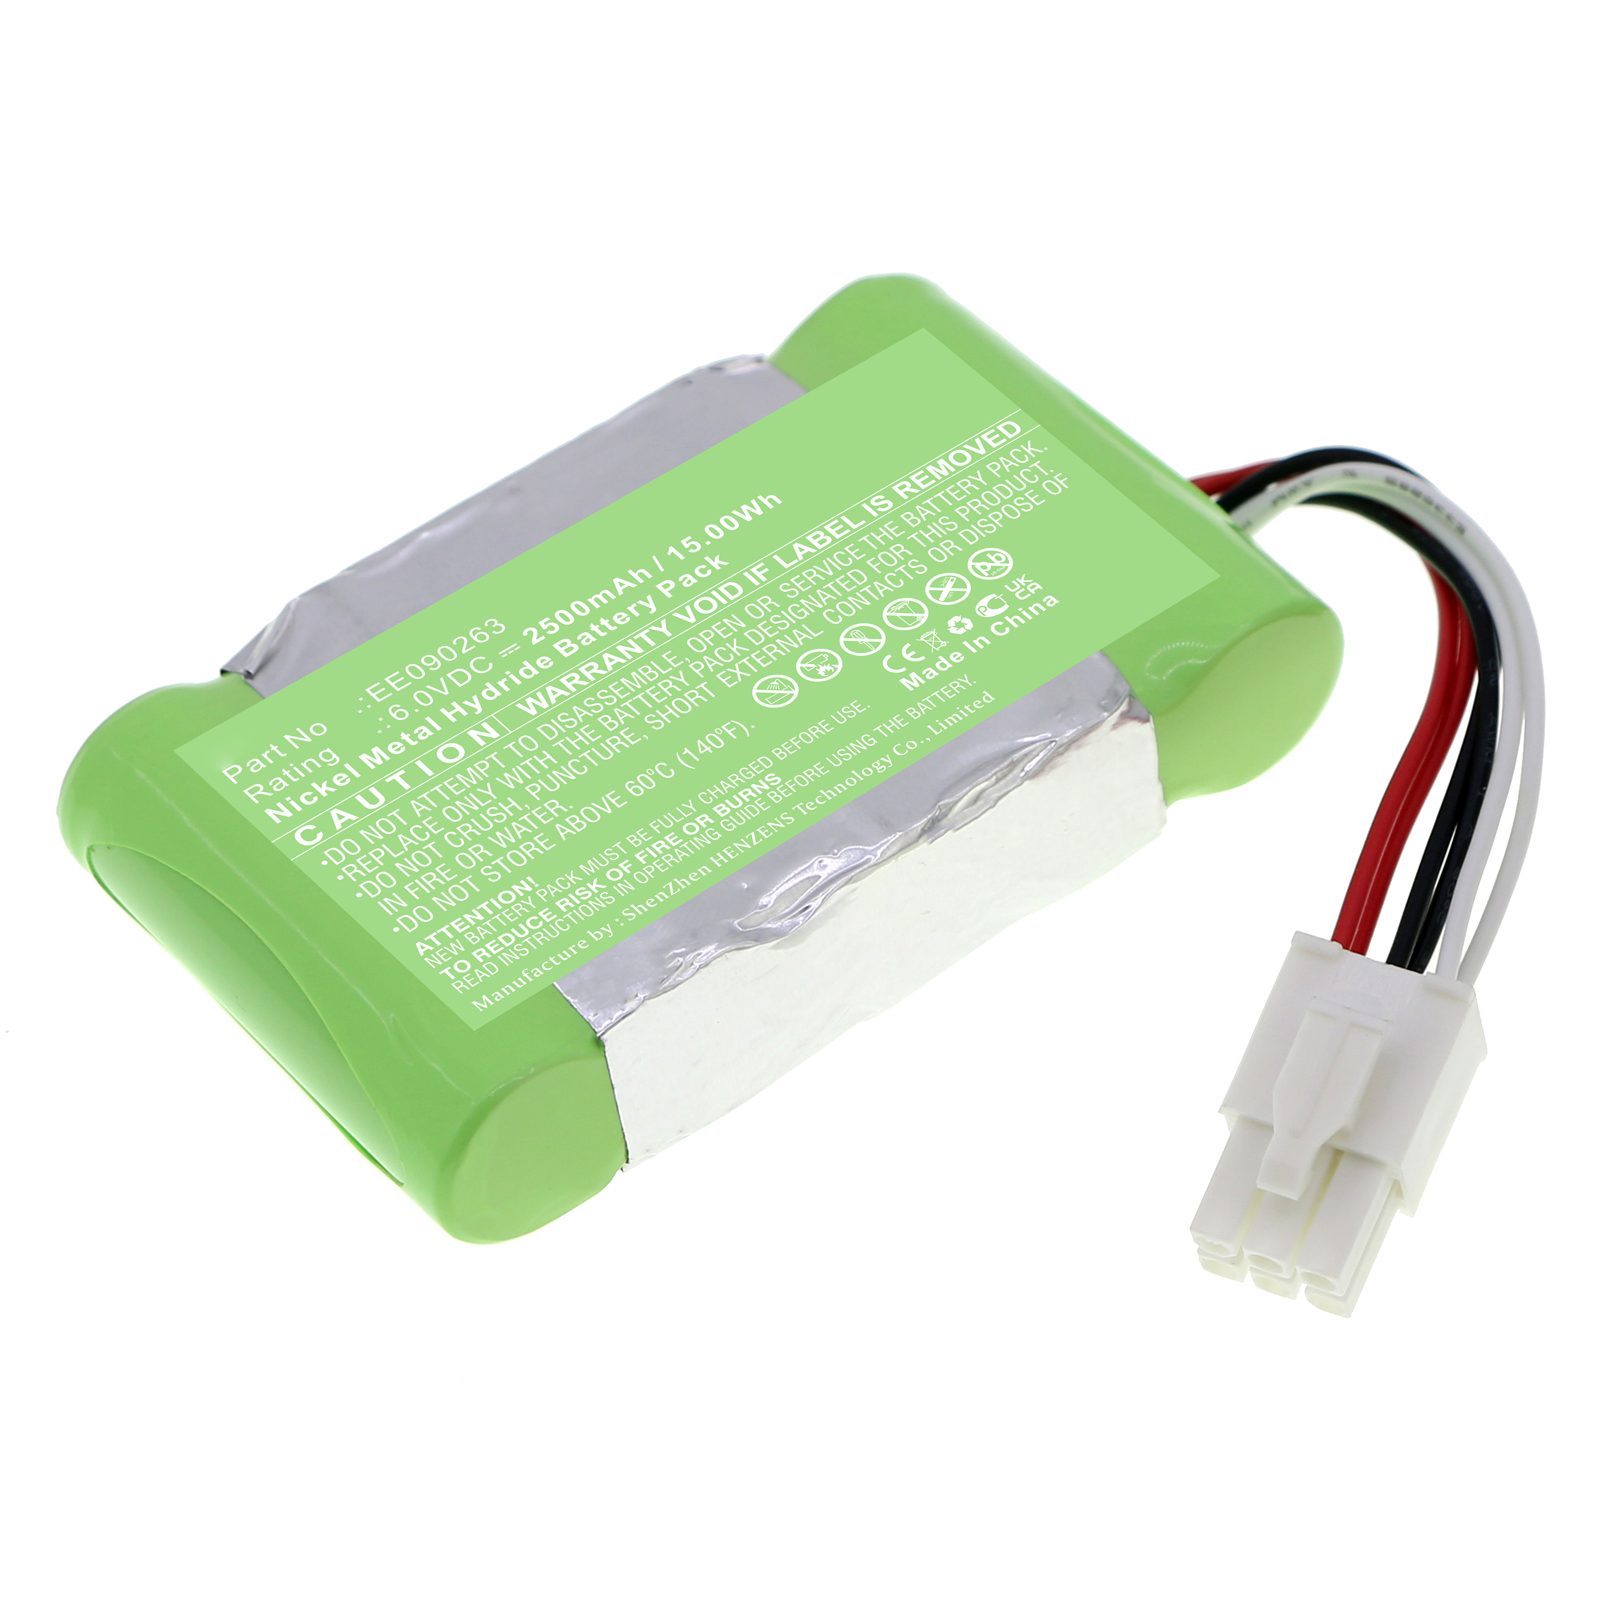 Synergy Digital Medical Battery, Compatible with Siemens EE090263 Medical Battery (Ni-MH, 6V, 2500mAh)